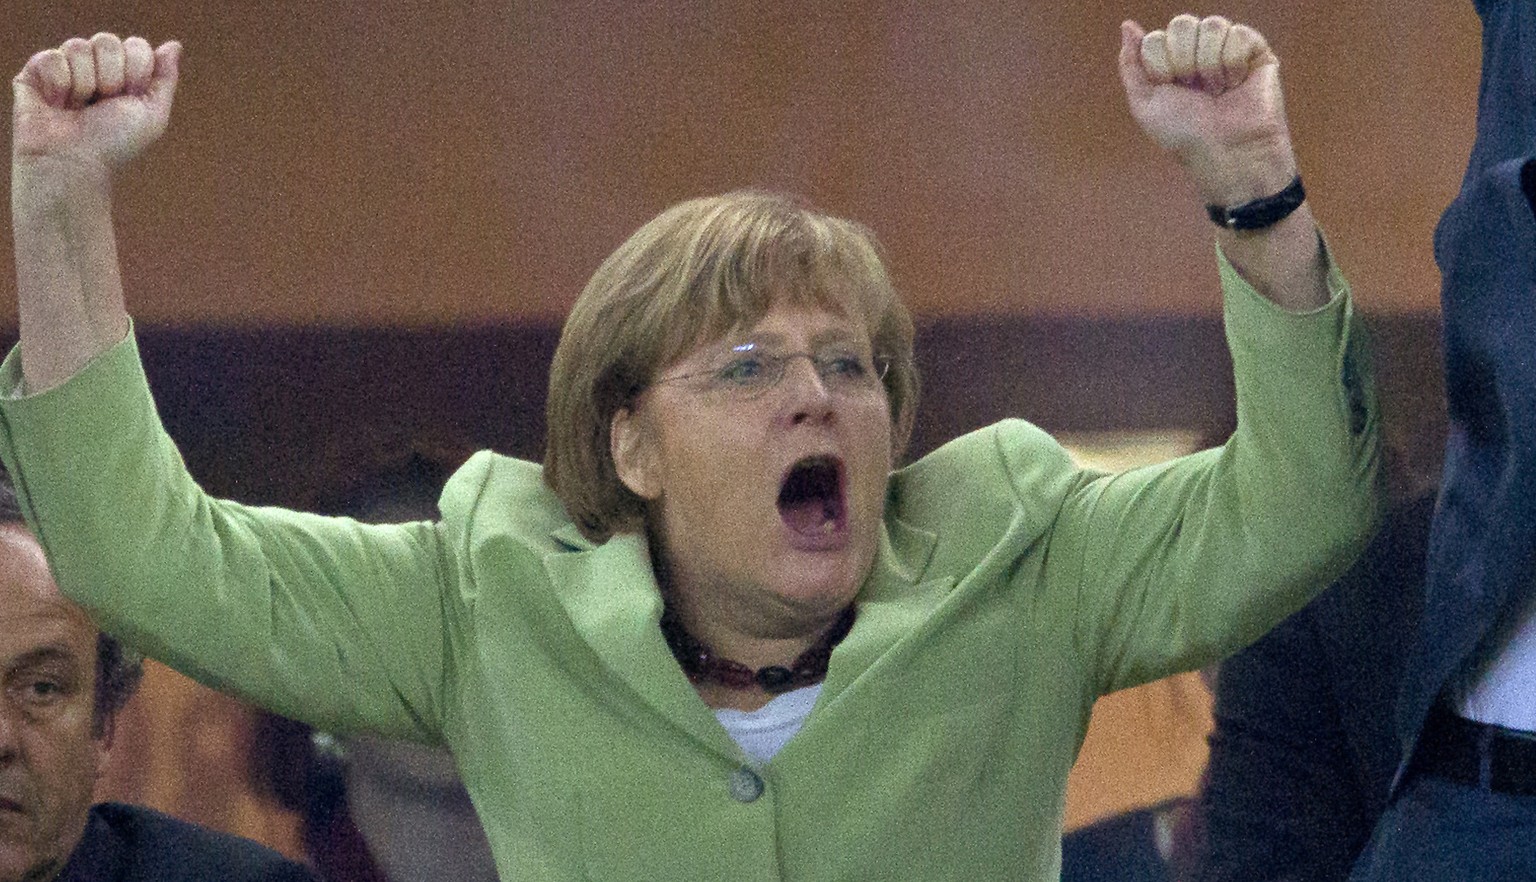 FILE - In this June 22, 2012 file photo German Chancellor Angela Merkel celebrates during the Euro 2012 soccer championship quarterfinal match between Germany and Greece in Gdansk, Poland. Germany won ...